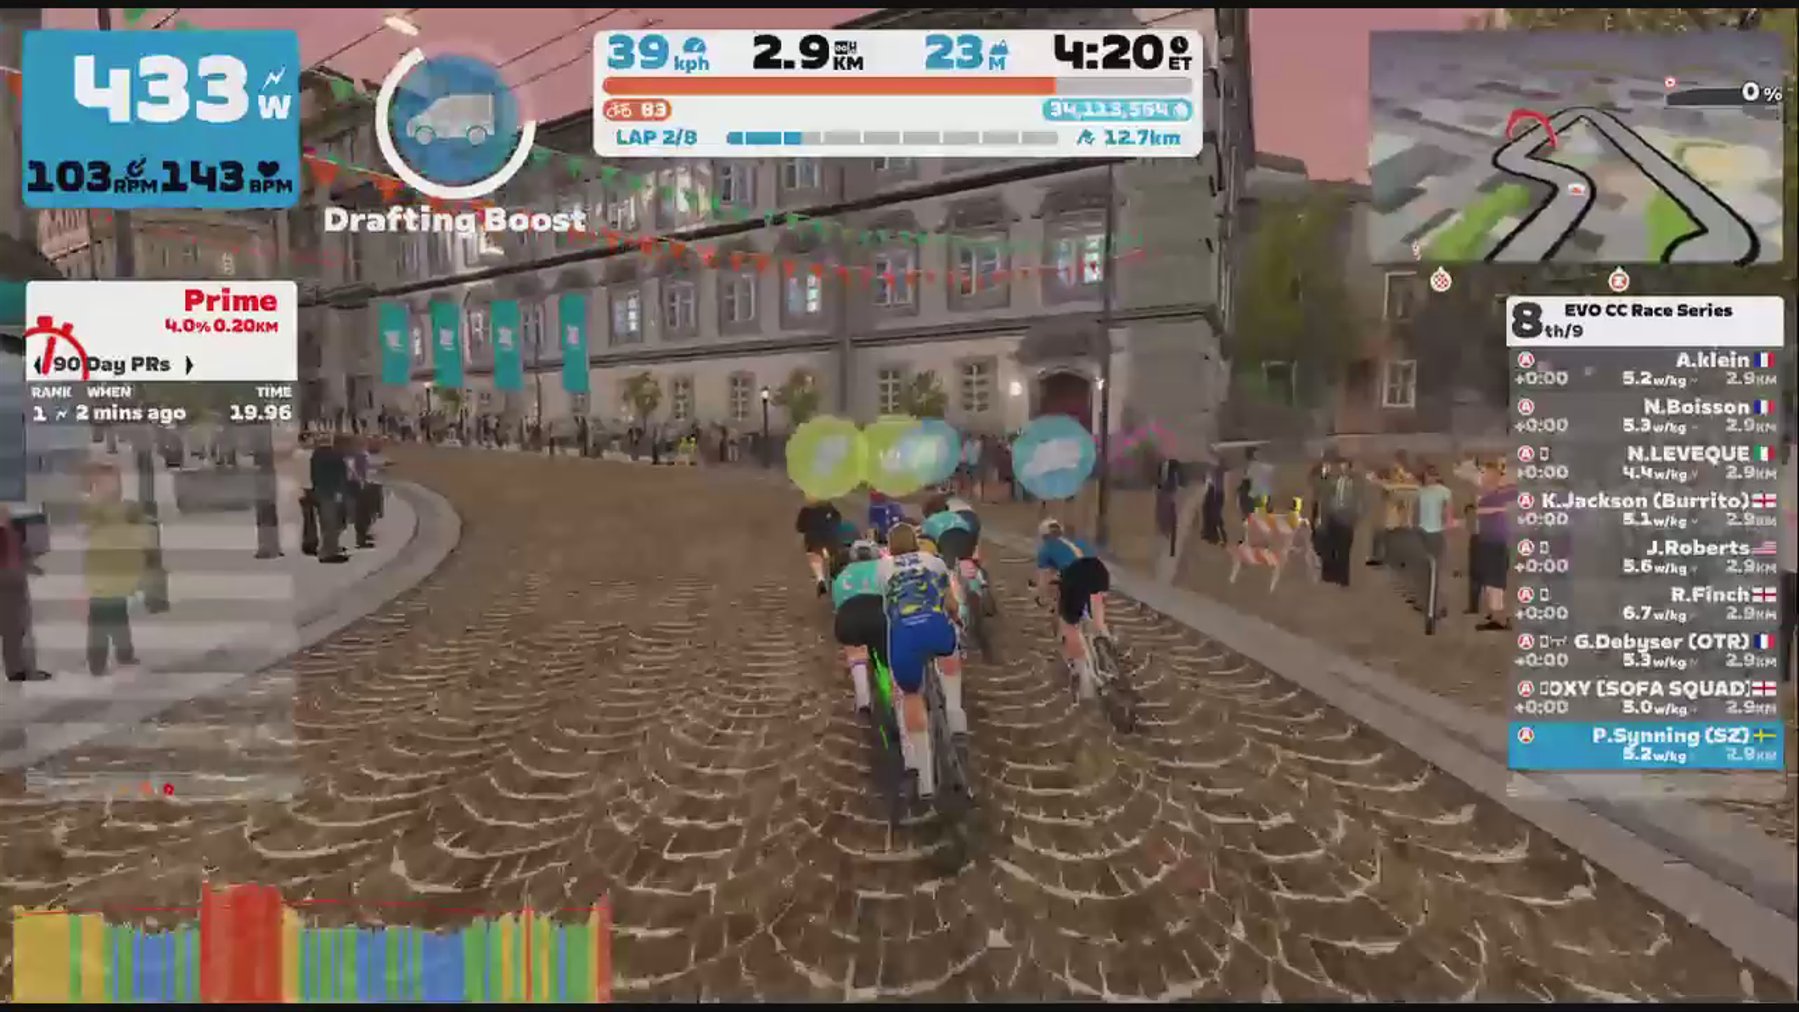 Zwift - Race: EVO CC Race Series (A) on Downtown Dolphin in Crit City